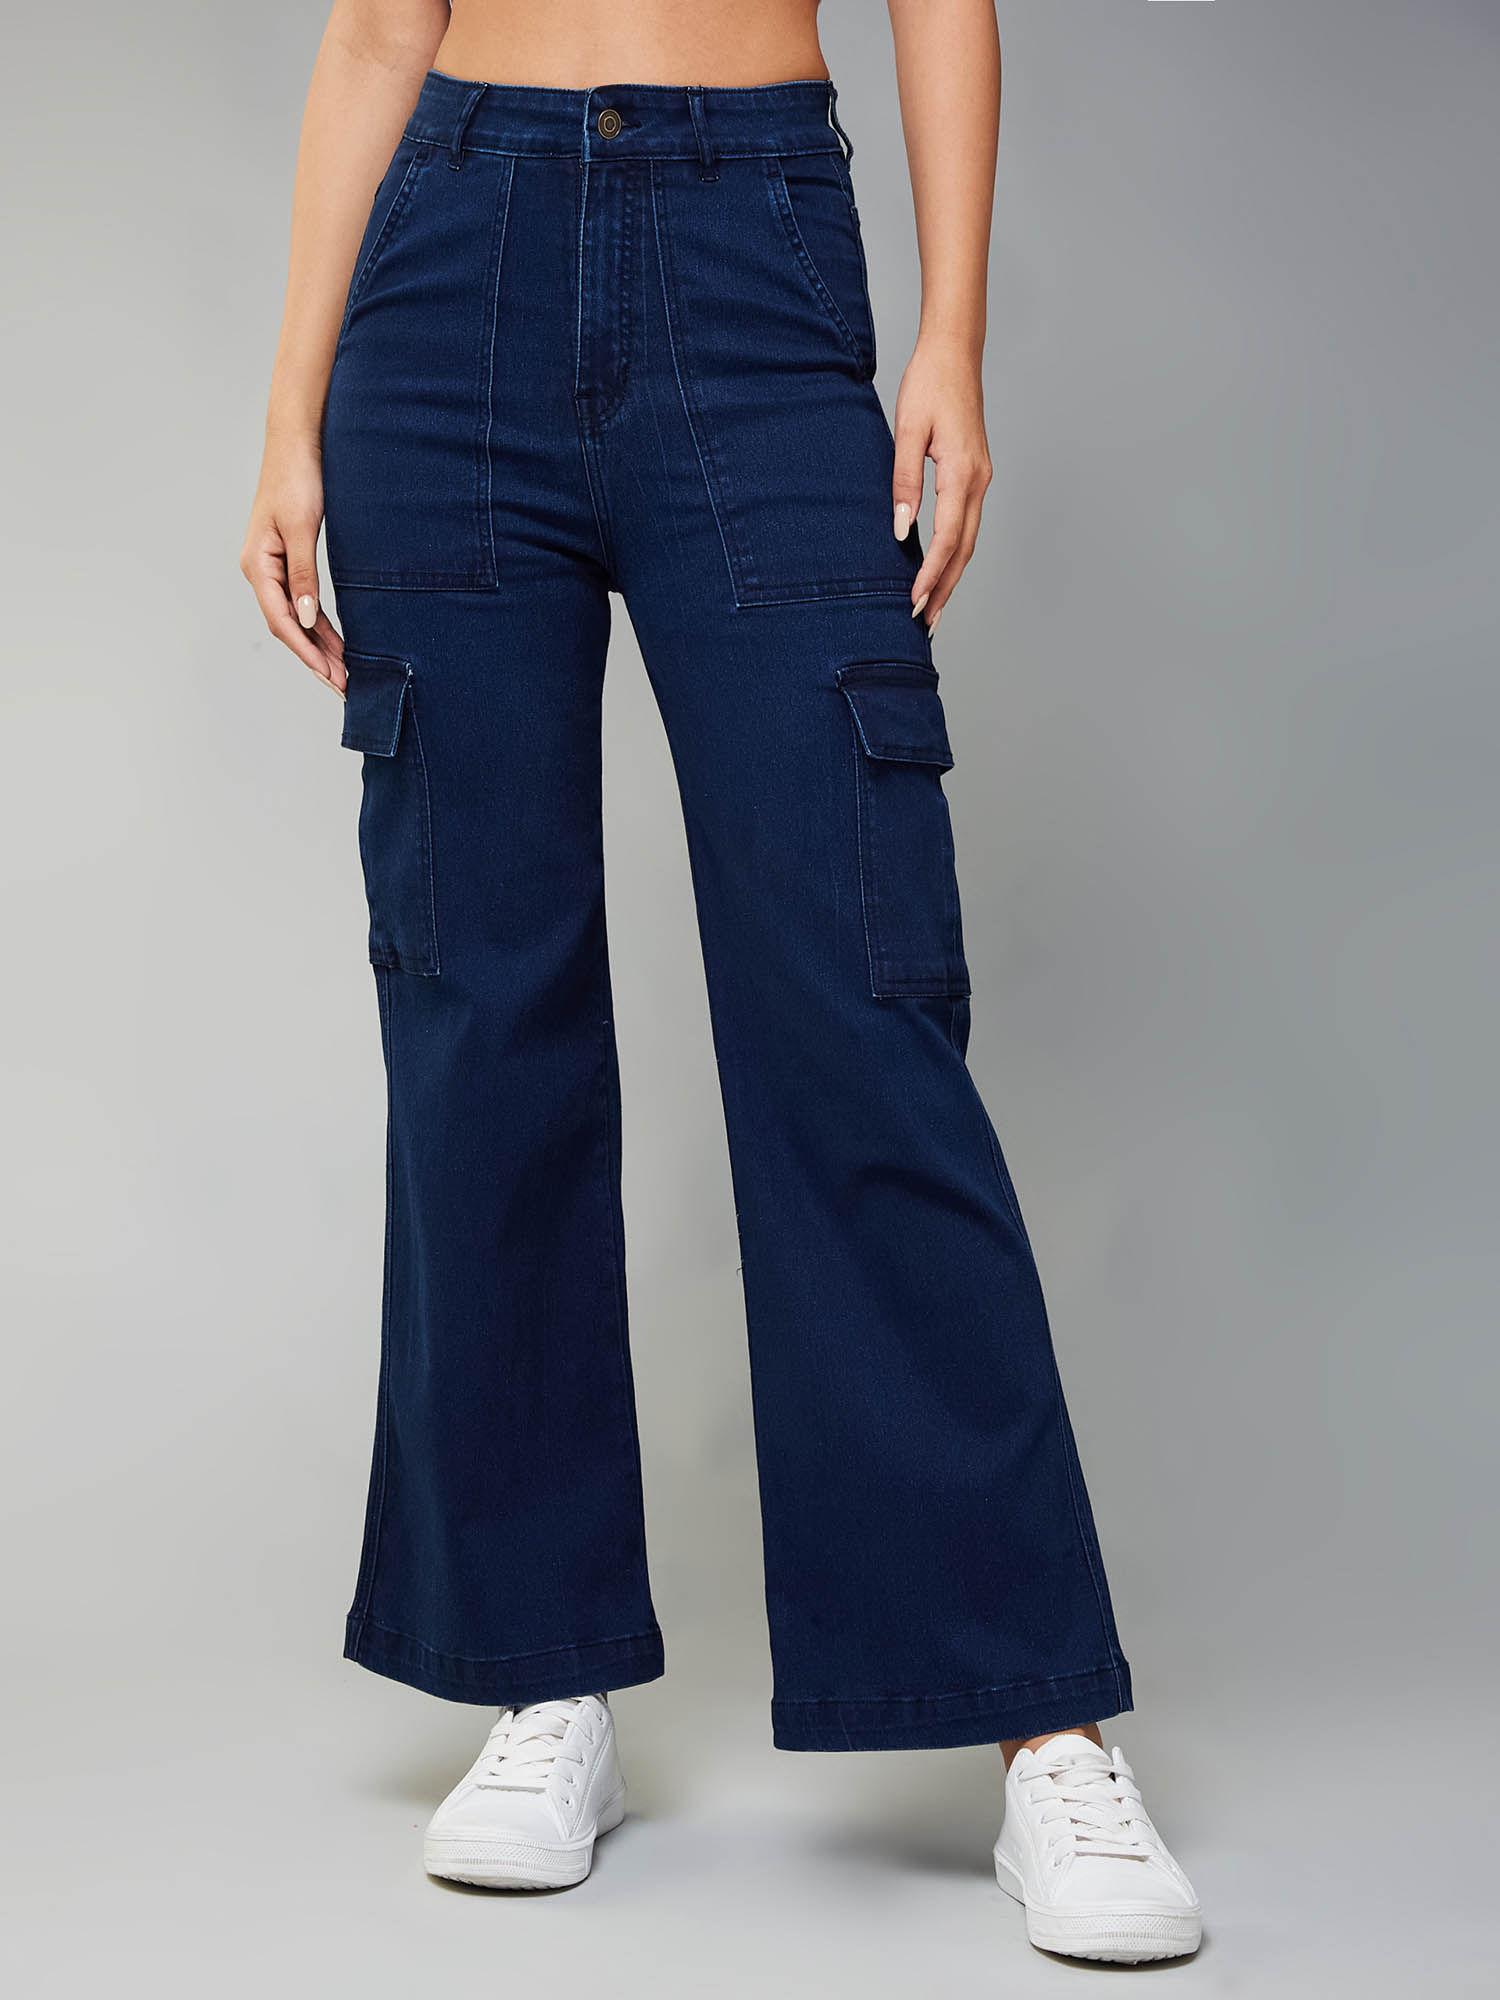 navy blue wide-leg high-rise clean-look stretchable denim cargo jeans